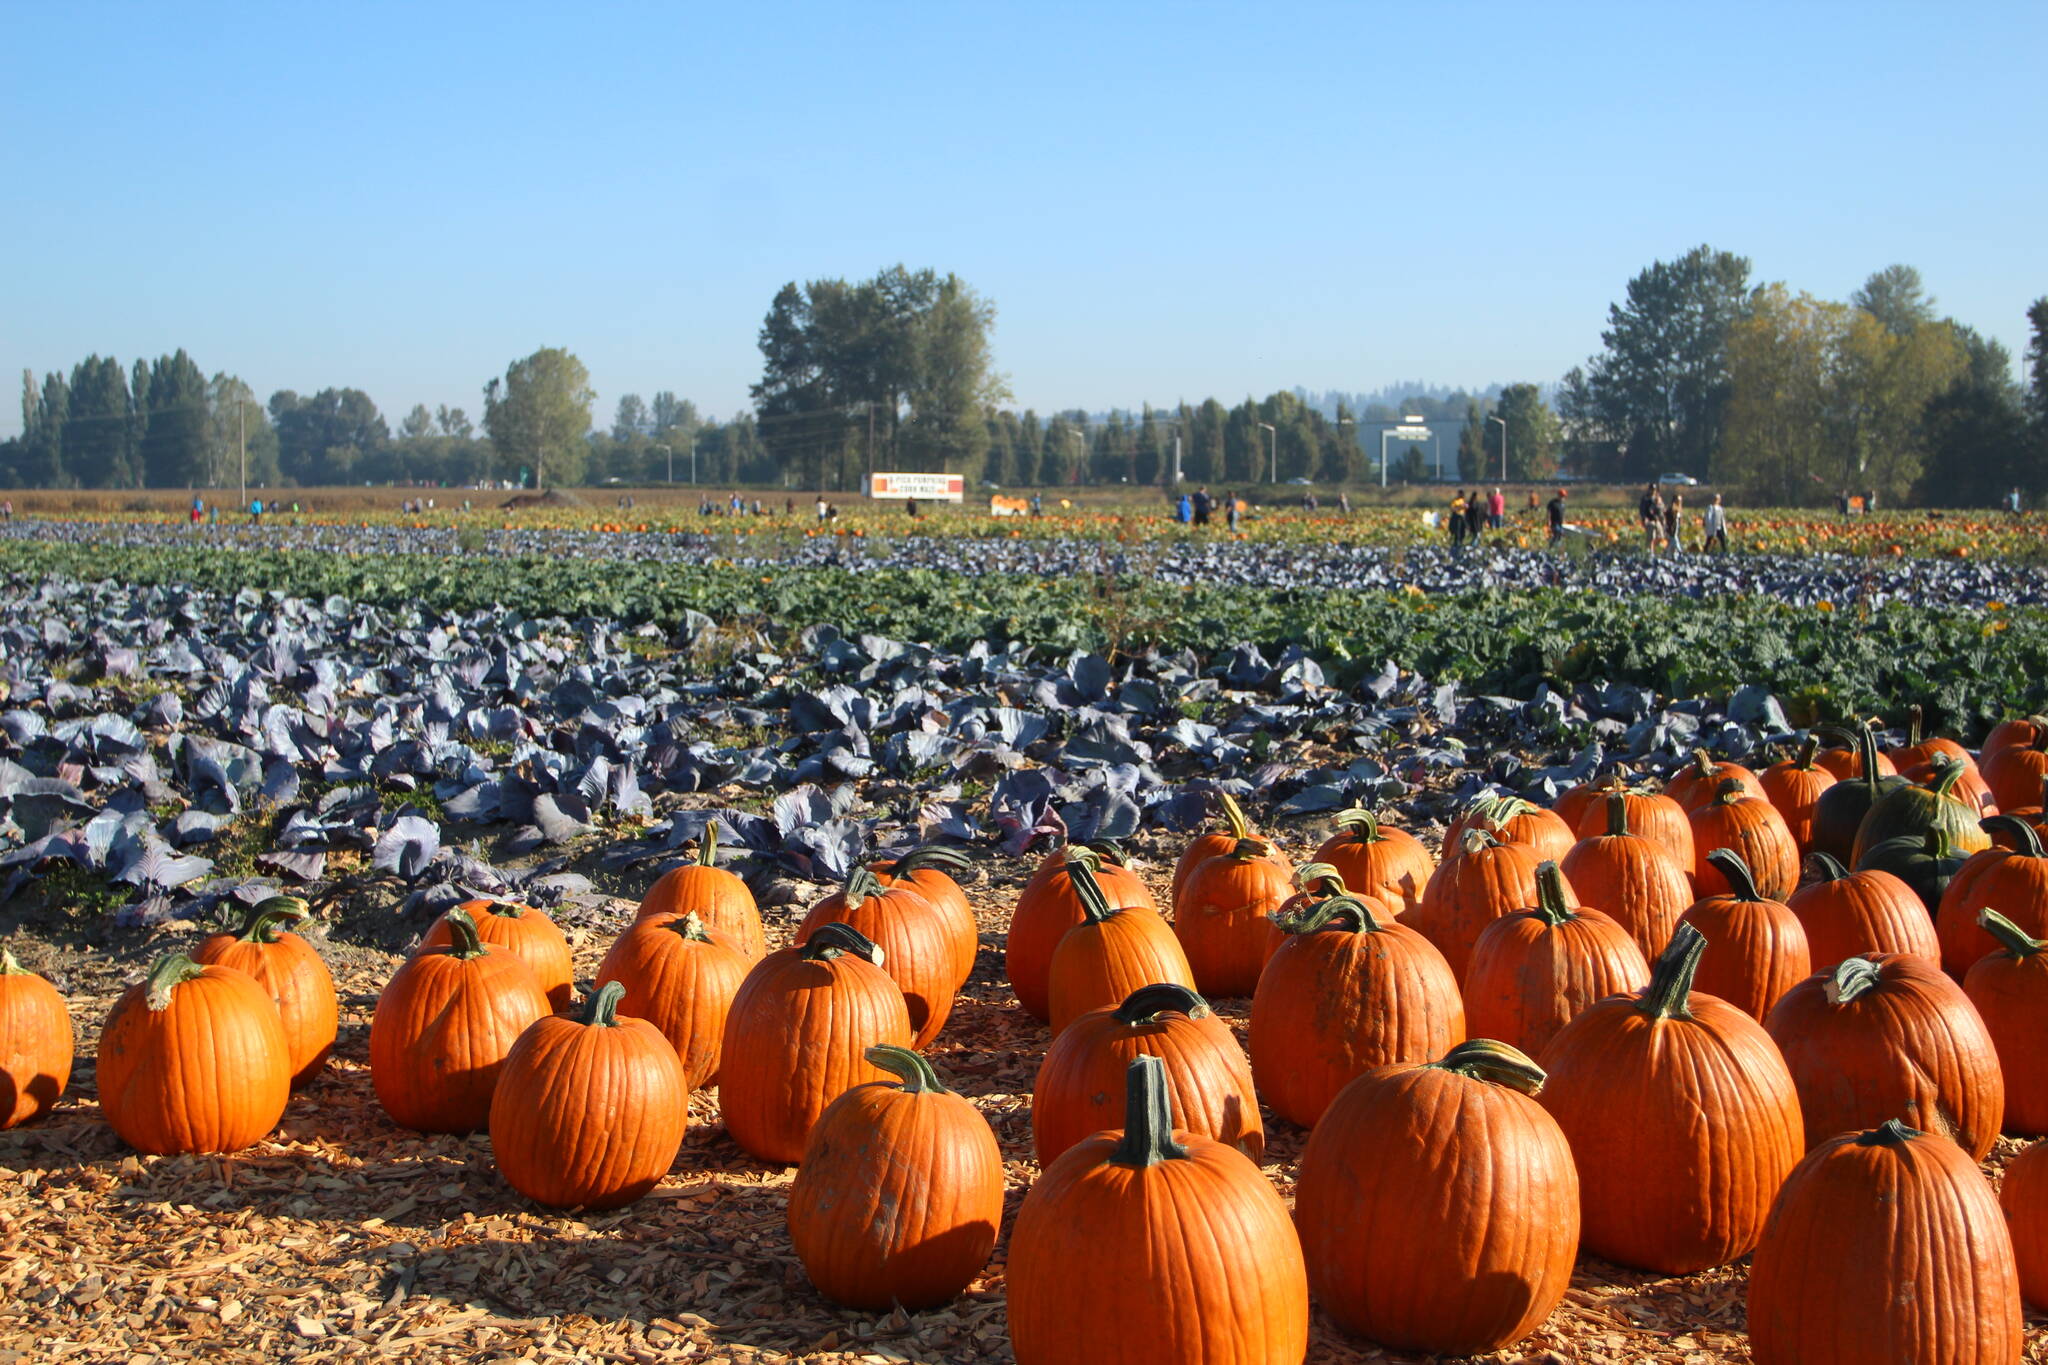 Photos by Olivia Sullivan / Sound Publishing
Pumpkins await visitors at Carpinito Brothers Farm Pumpkin Patch in the Kent Valley.